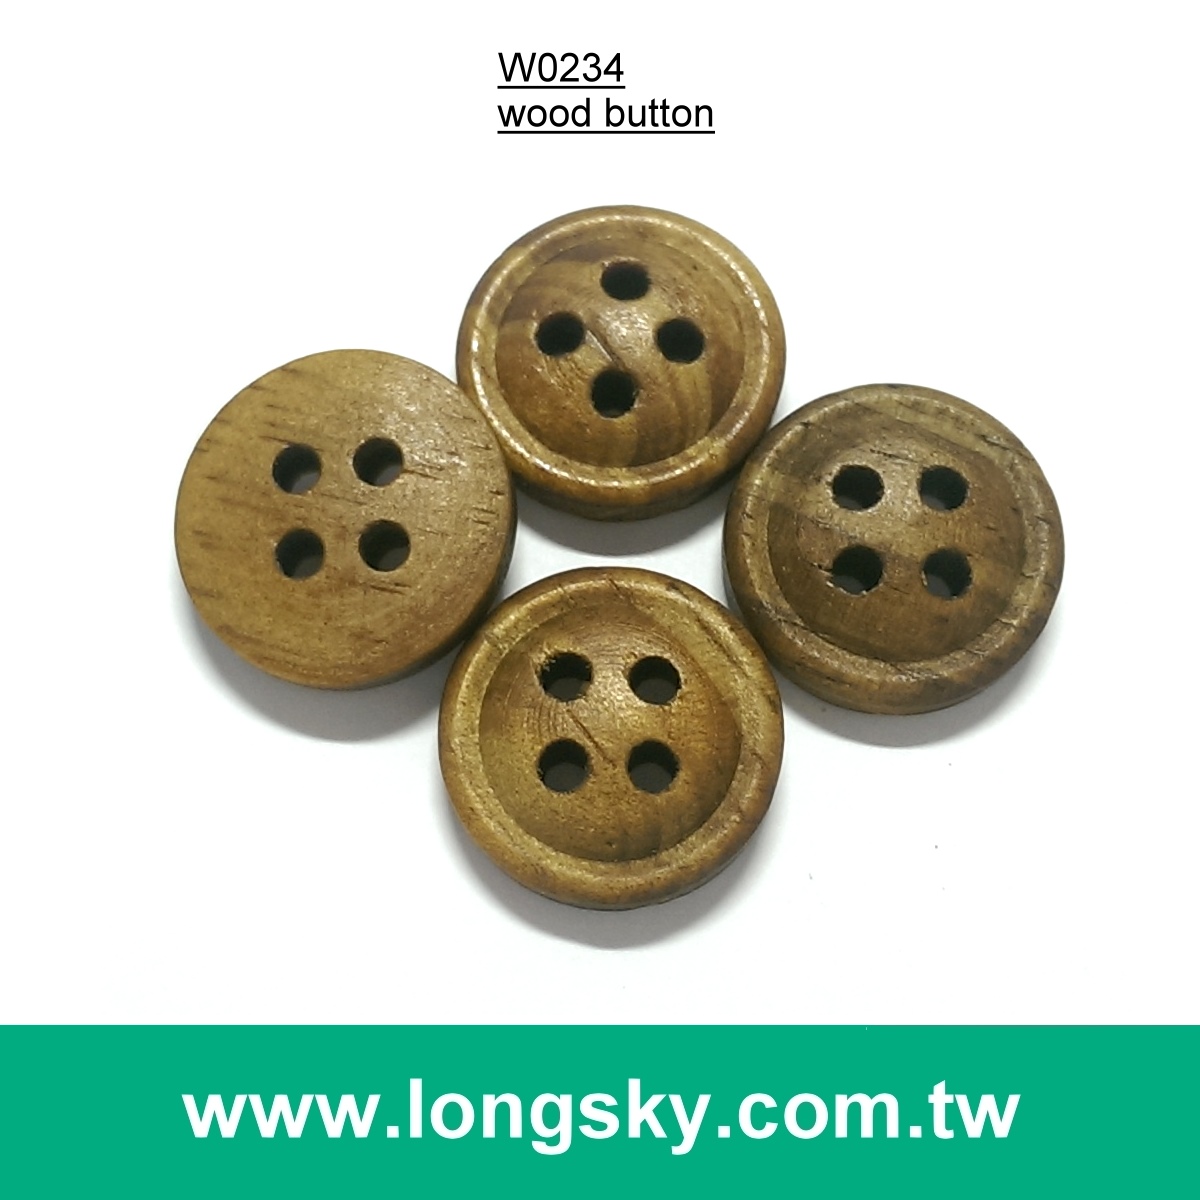 (#W0234) 24L 15mm 4 hole coffee brown wooden garment button